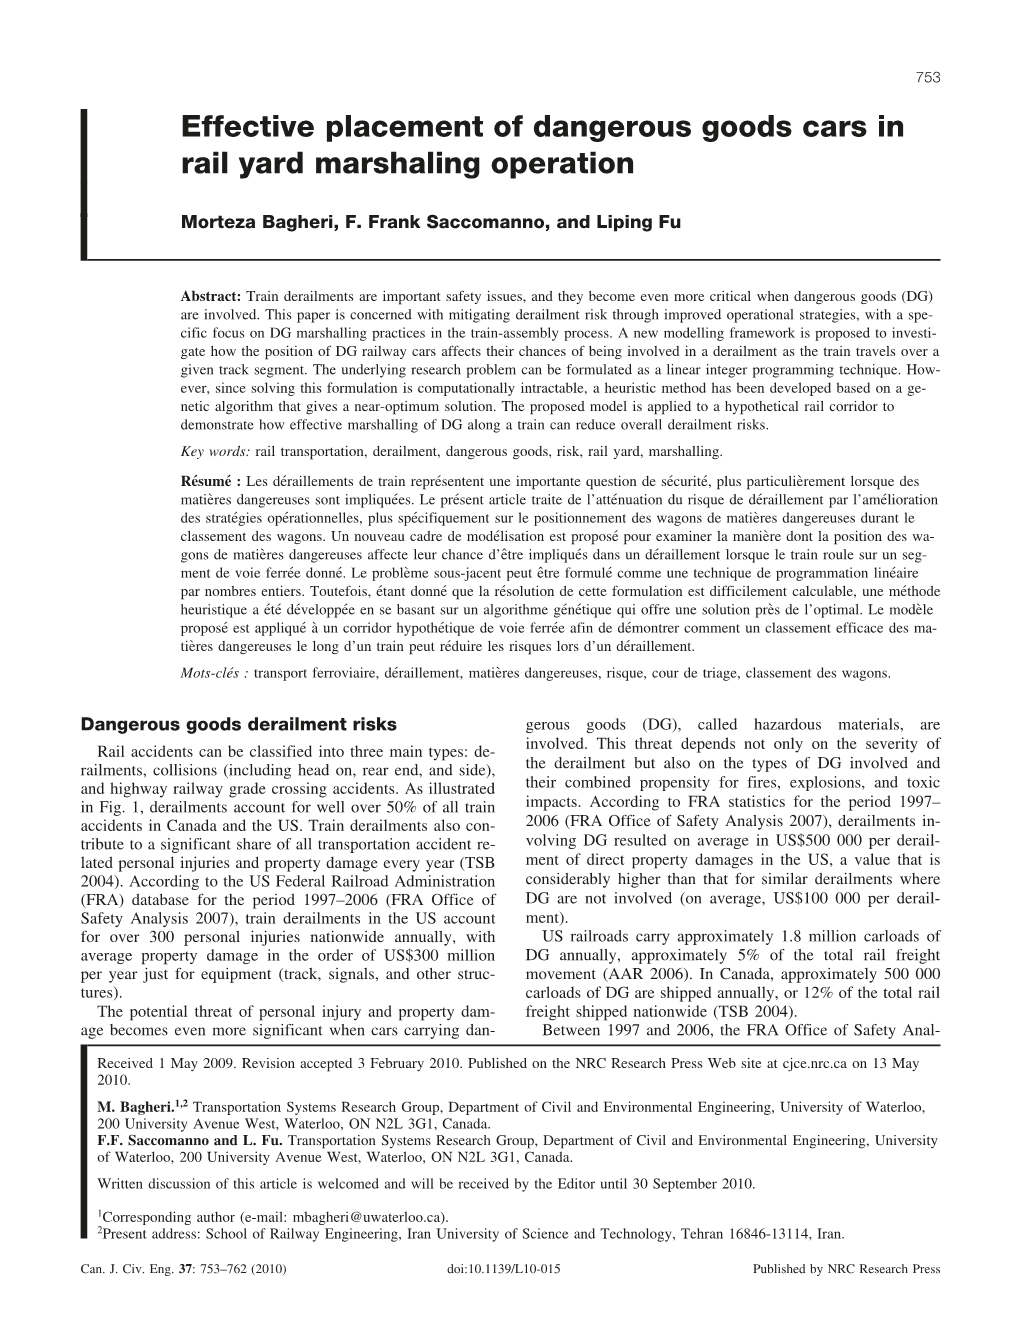 Effective Placement of Dangerous Goods Cars in Rail Yard Marshaling Operation